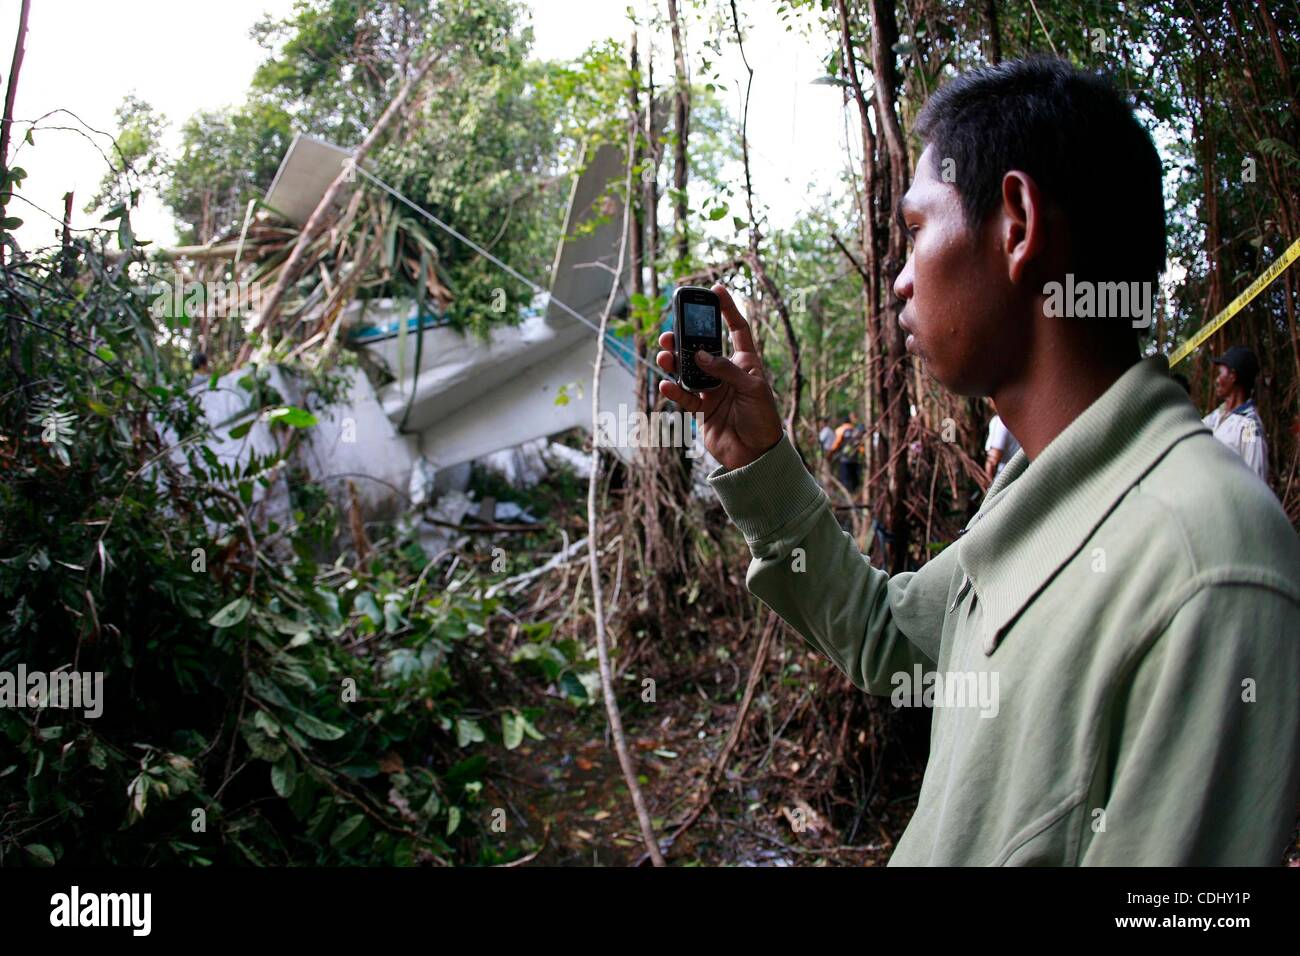 Feb 12, 2011 - Bintan, Riau, Indonesia - A man taking photos of the plane. Officials say an Indonesian light transport plane has crashed on Bintan island after undergoing engine maintenance, killing all five people on board. A Transportation Ministry spokesman, Bambang Ervan, says the Cassa 212 turb Stock Photo